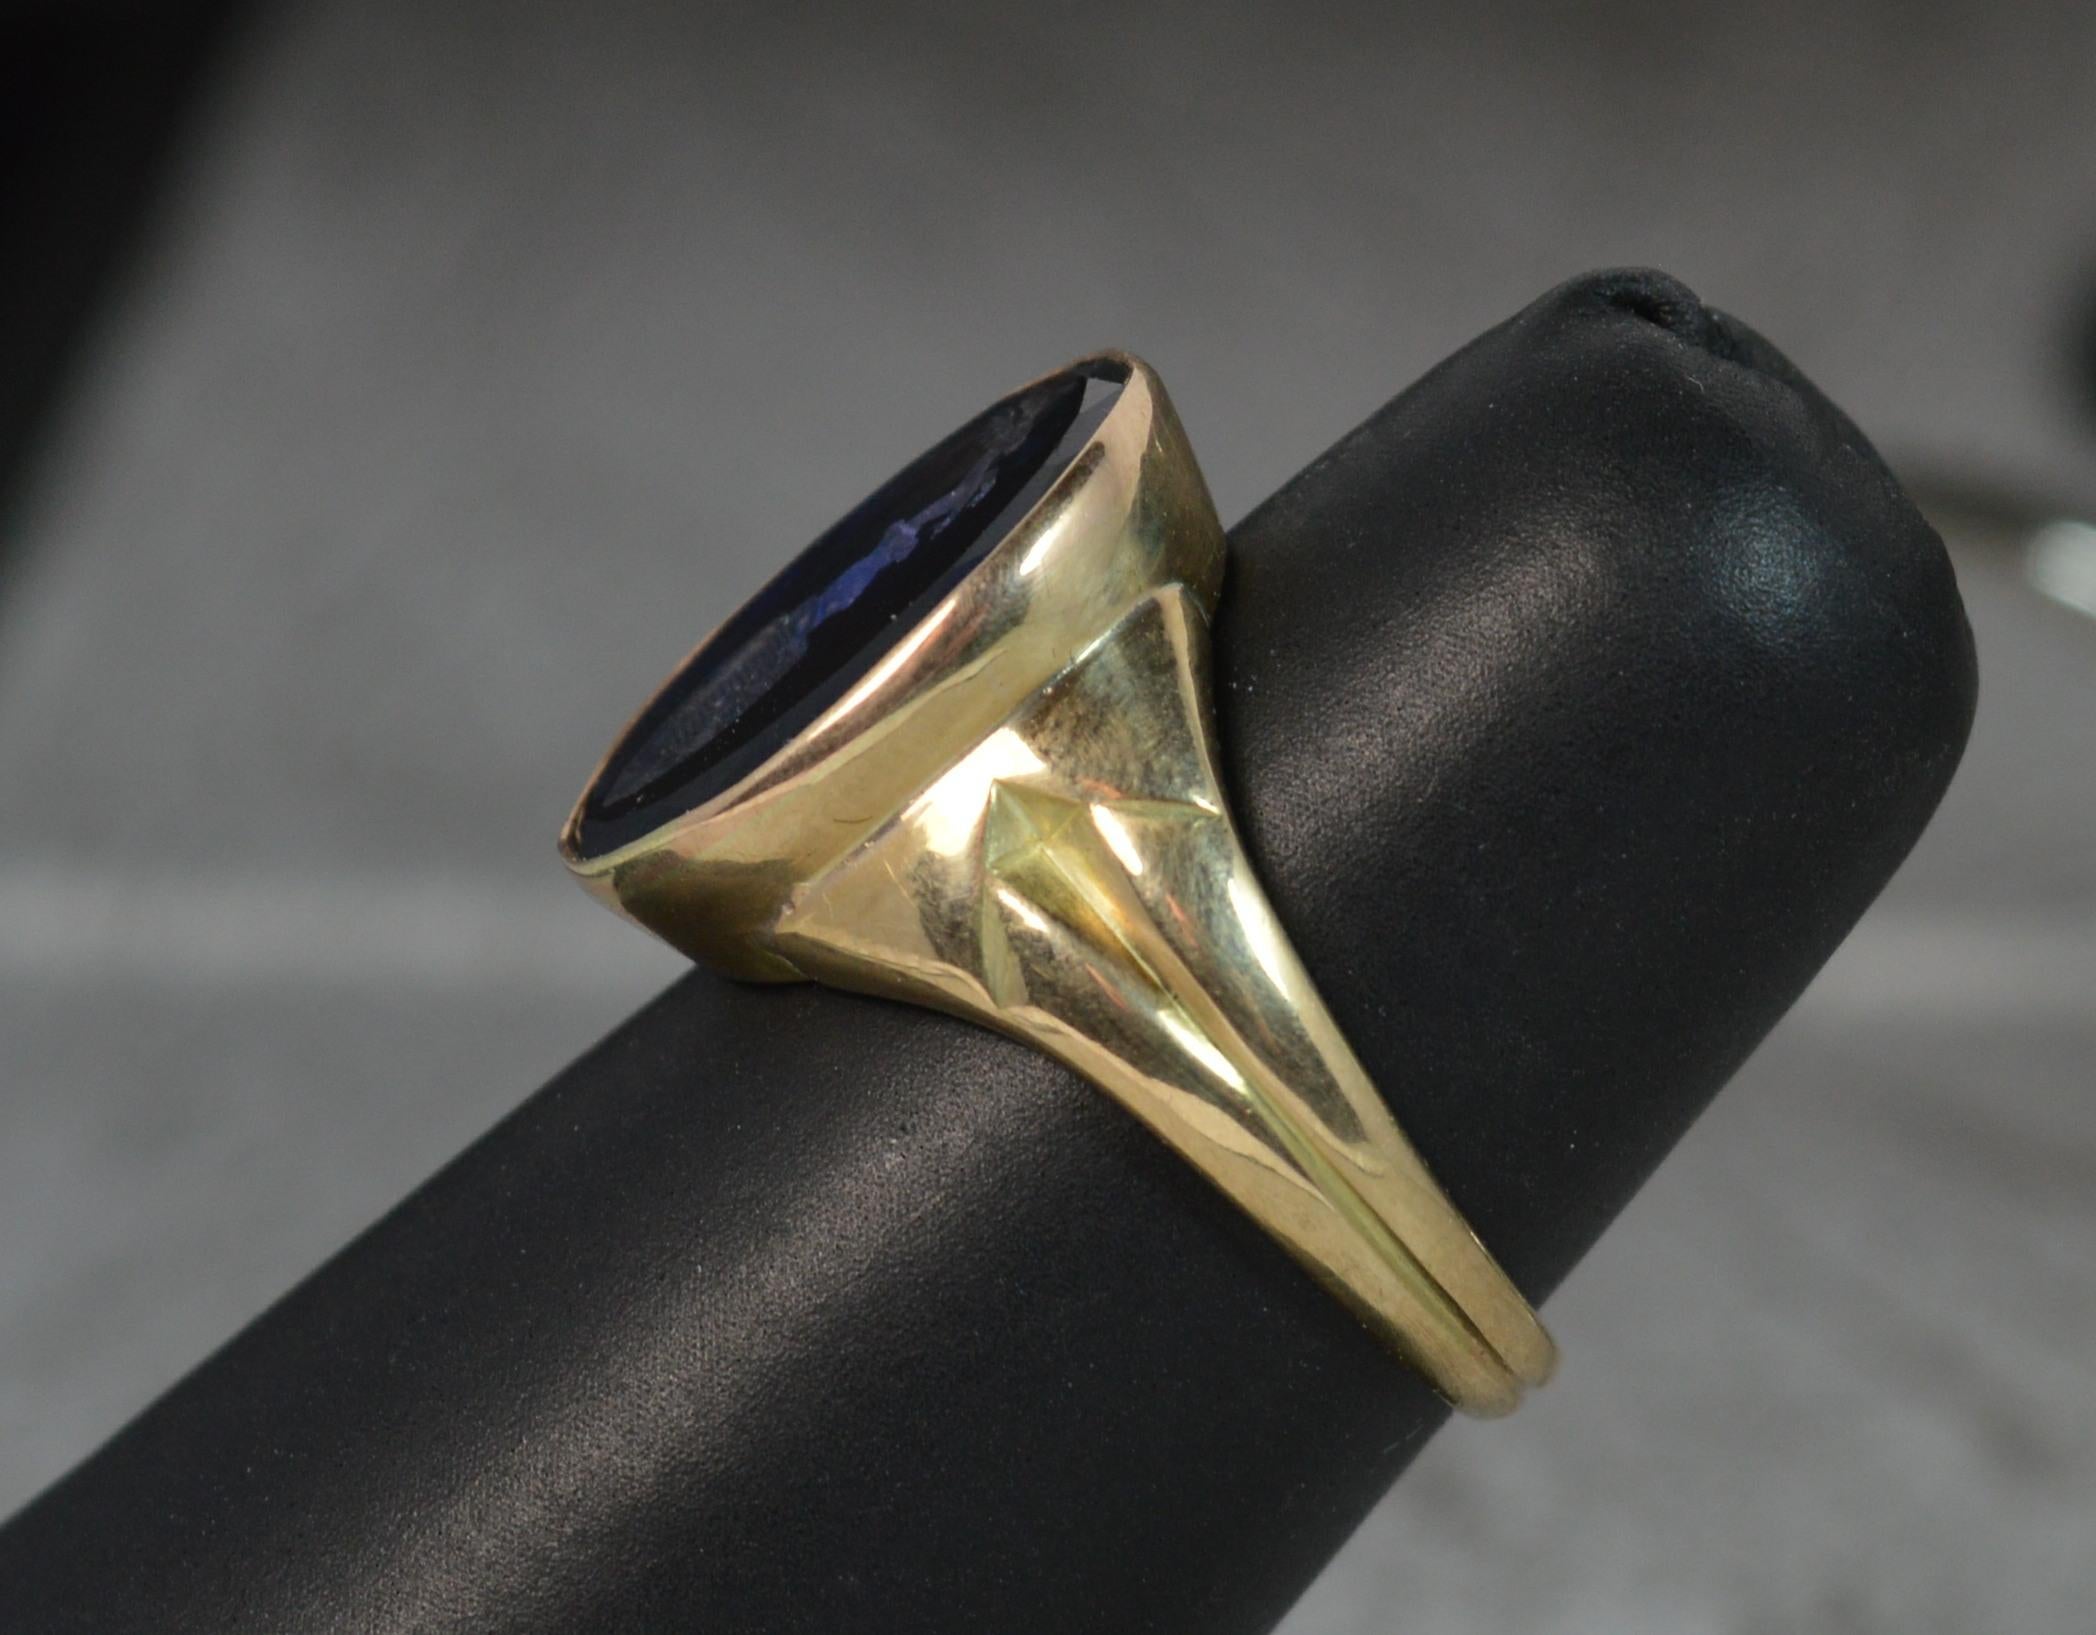 A superb single blue sapphire and 18ct gold seal intaglio signet ring.
The oval blue sapphire in fine bezel setting. 12mm x 15mm stone. Expertly hand carved family crest to the centre of the sapphire. The design depicts a rearing deer to top above a